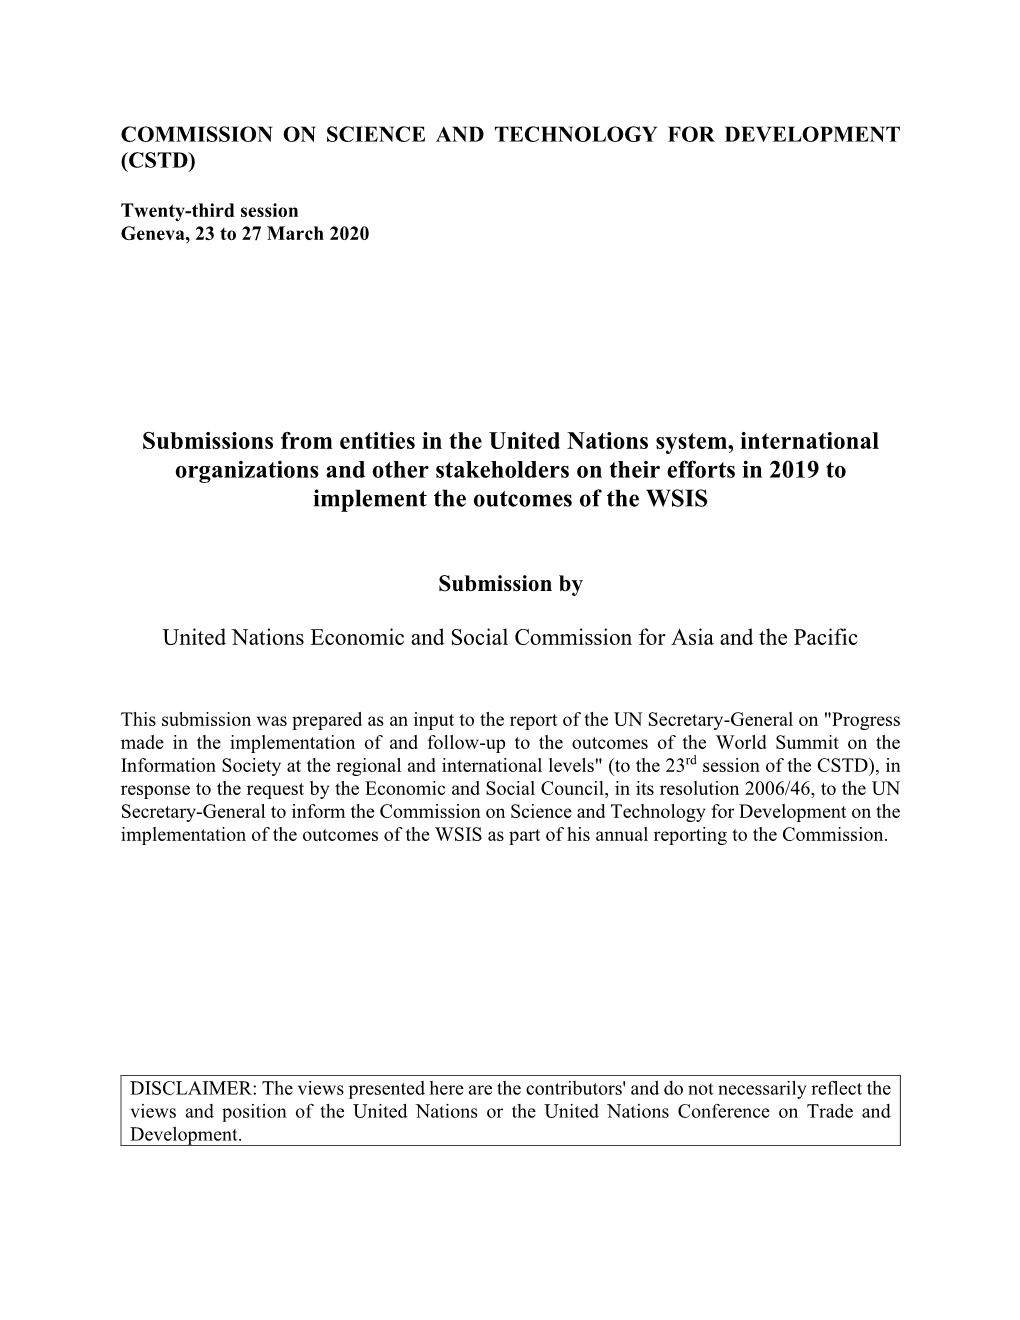 Contribution to the UN Secretary-General's 2019 Report on WSIS Implementation and Follow-Up by the Economic and Social Commi